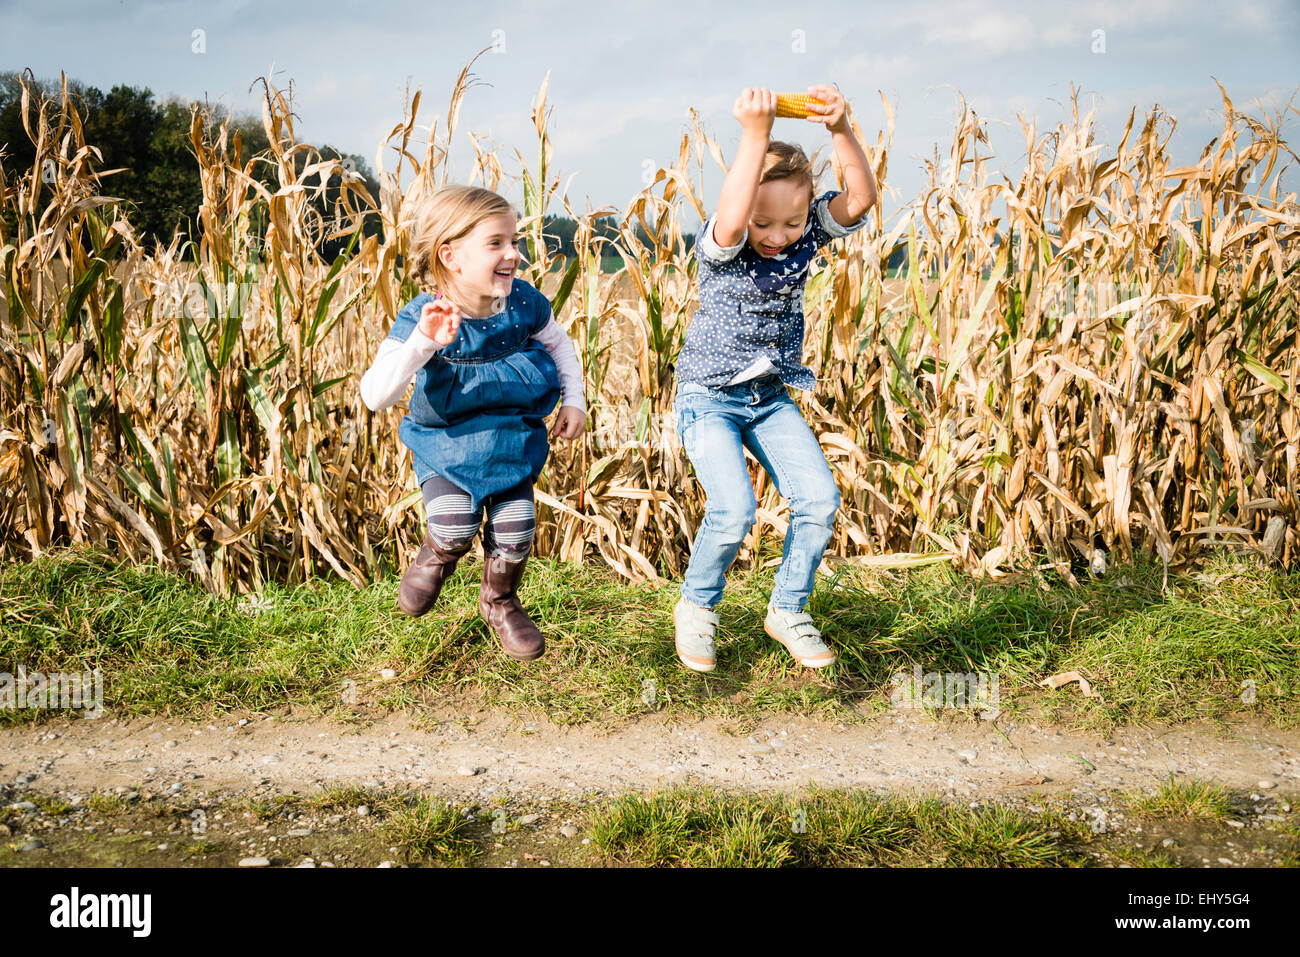 Two girls jumping in front of maize field Stock Photo